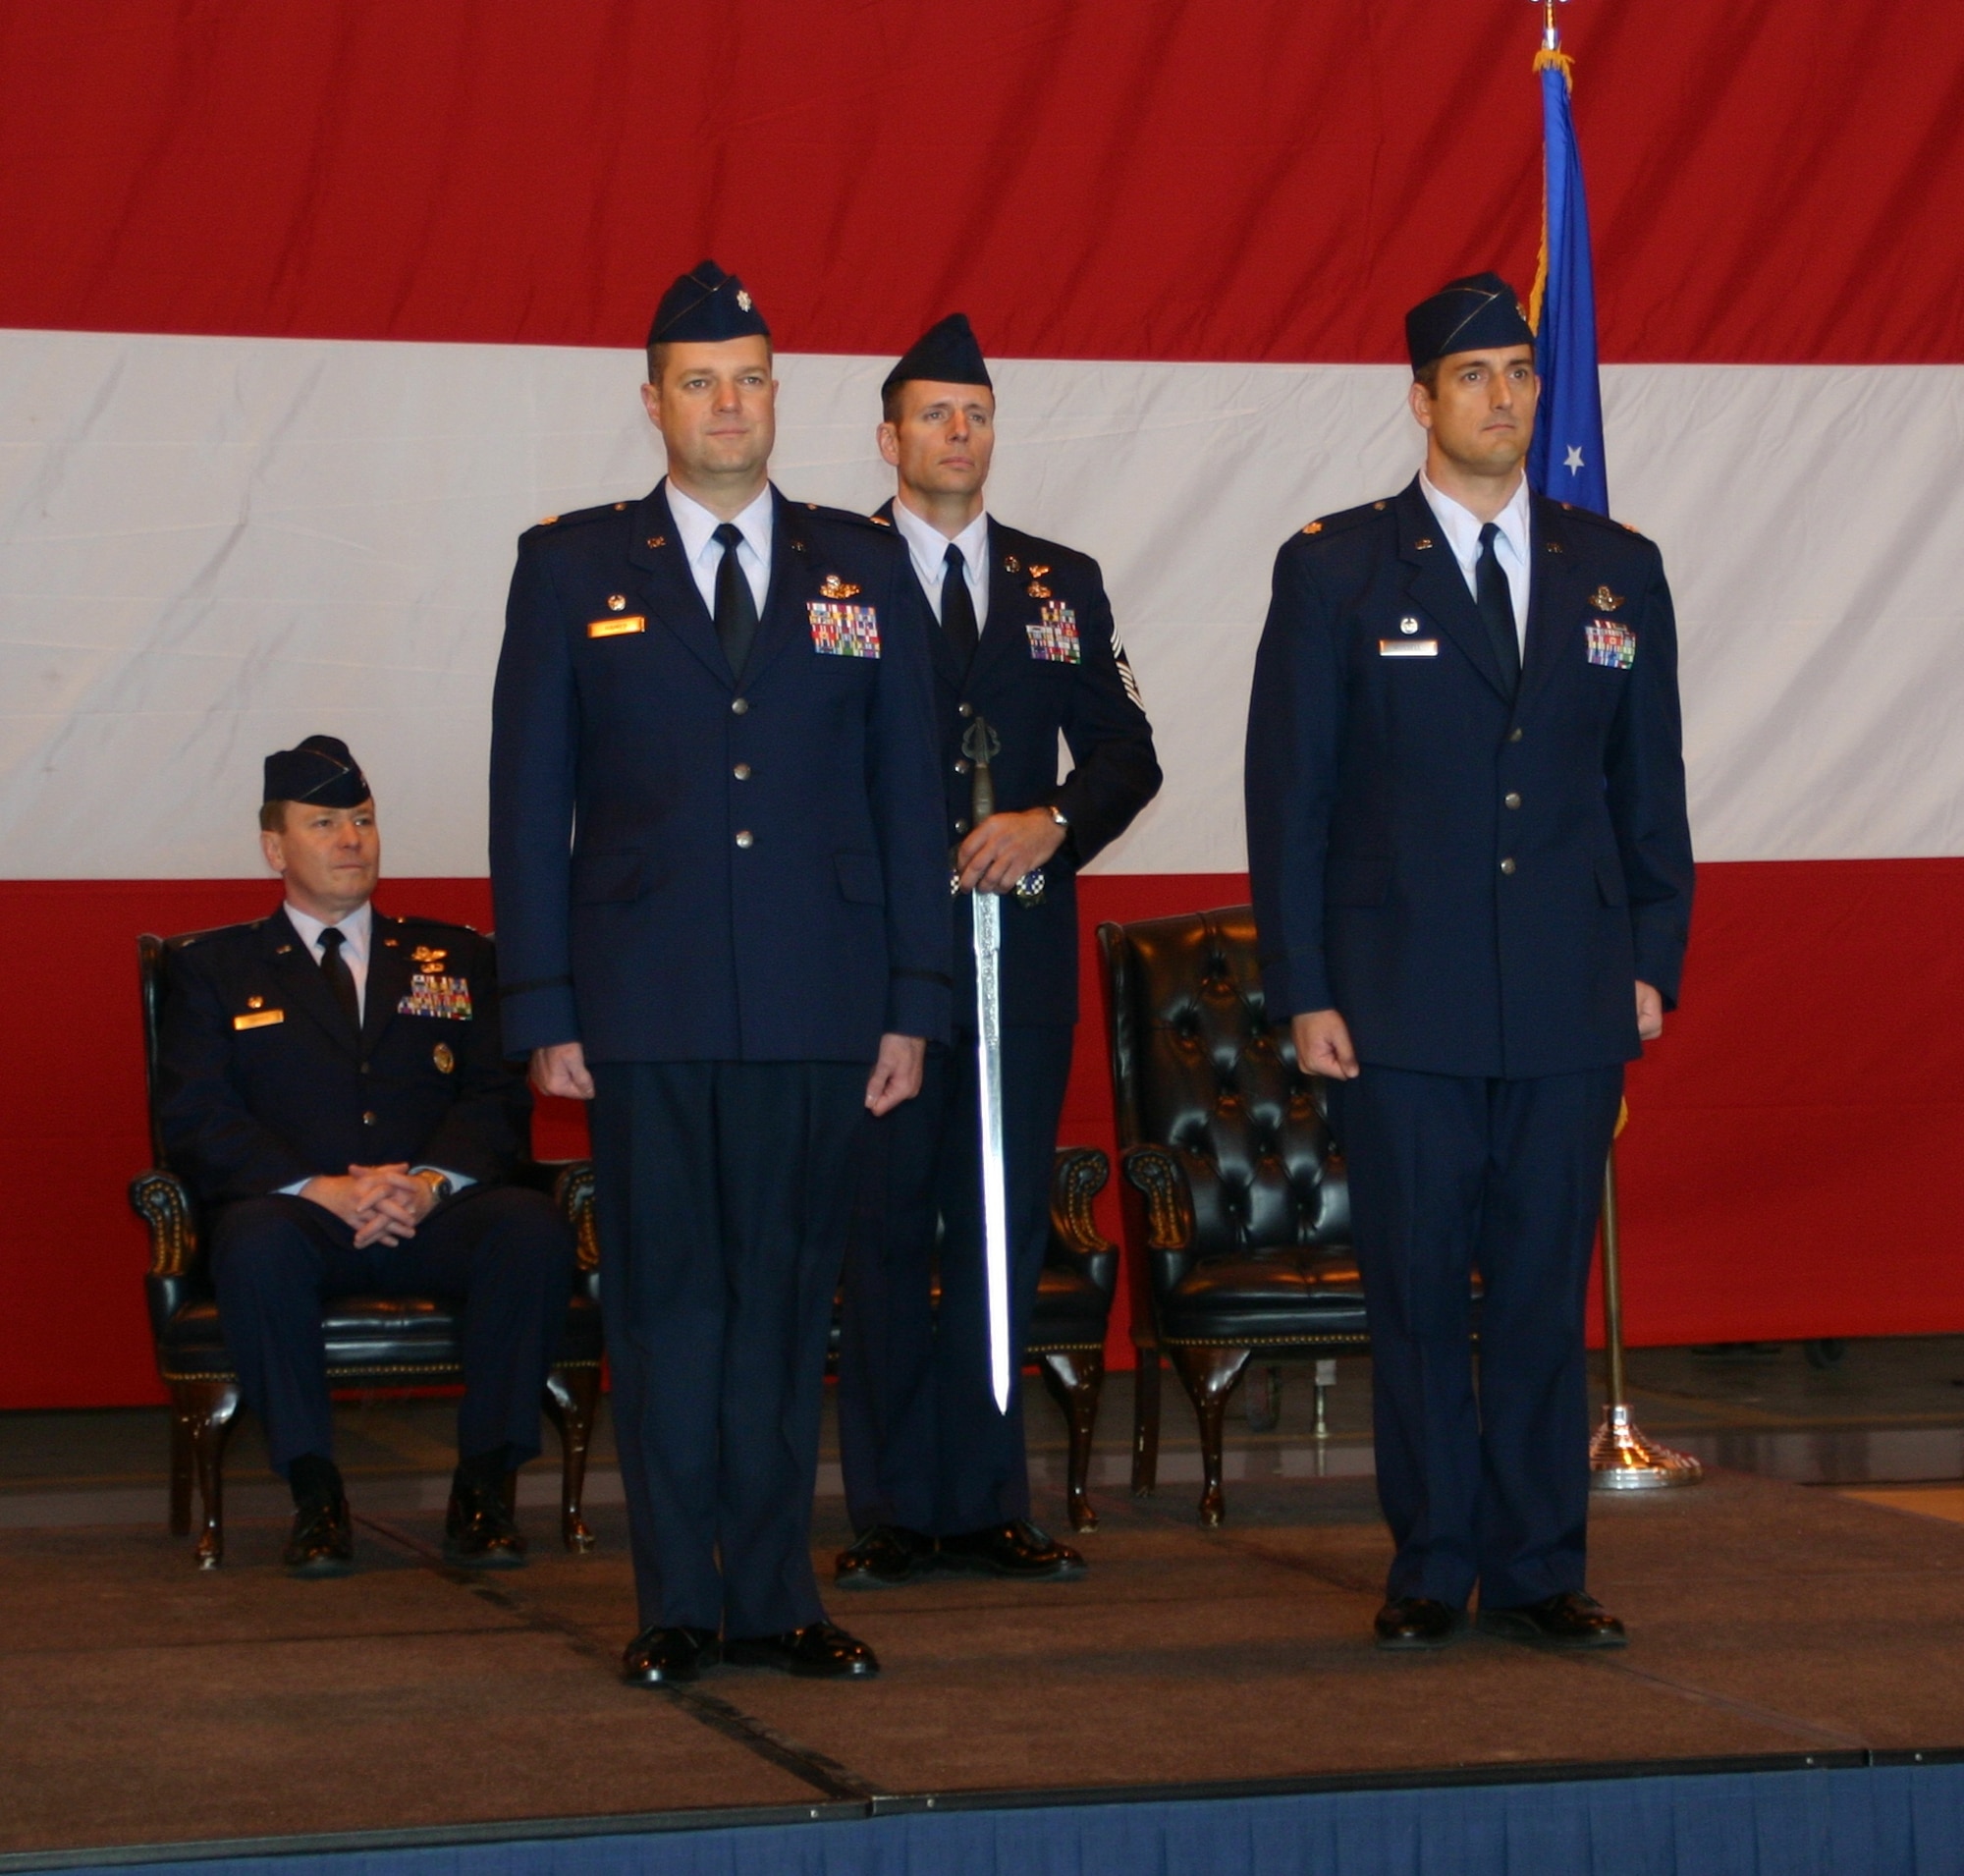 Lt. Col. John T. Russell, 963rd AACS, commander, prepares to pass the traditional Blue Knights' sword over to Lt. Col. Robert M. Haines, who accepted command of the squadron March 7 in a change of command ceremony officiated by Col. Christof P. Cordes, 552nd Operations Group, commander (seated).